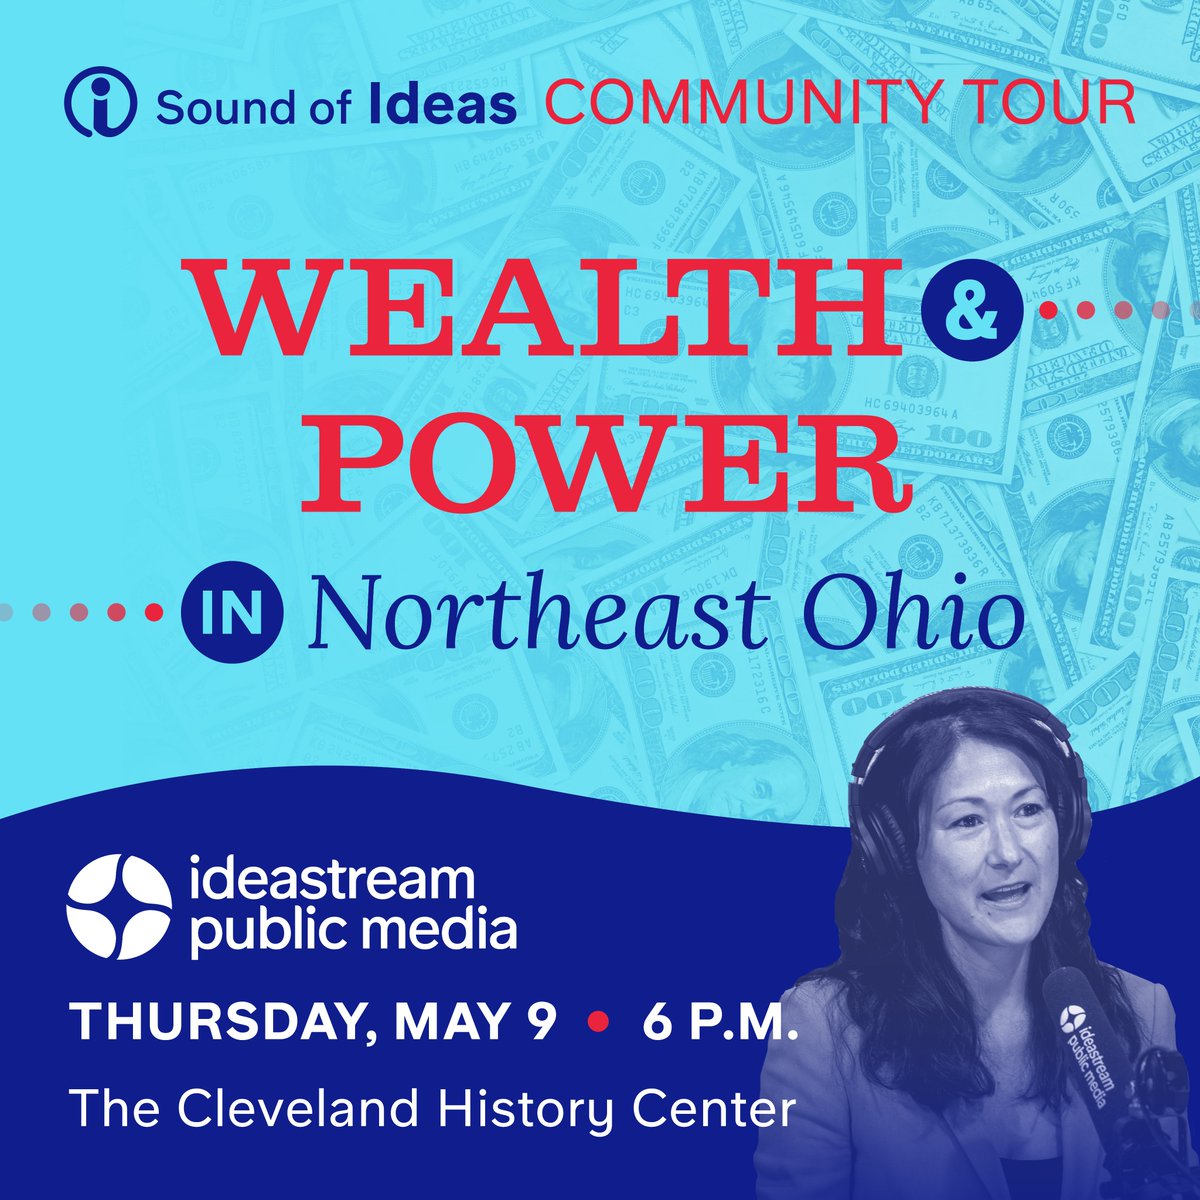 Economic inequality is growing in America, so is the power imbalance growing with it? 💰 On the next @soundofideas Community Tour, host @JennyHamel_ convenes a discussion on the intersection of wealth and power. 🔗 Register here: eventbrite.com/e/sound-of-ide…